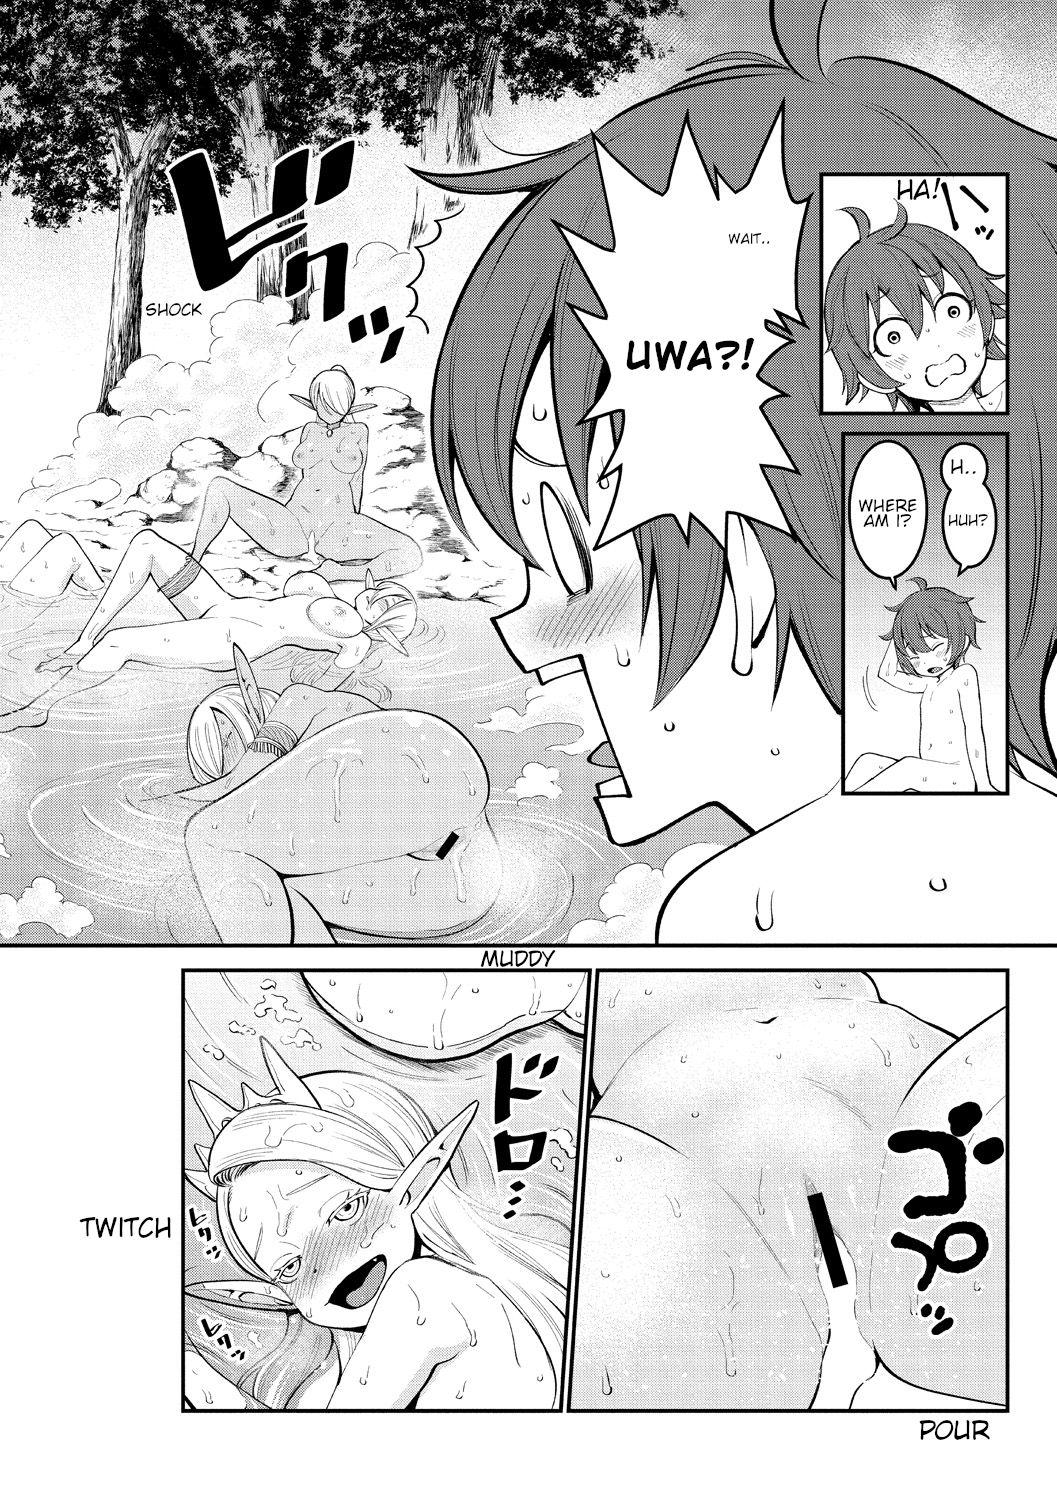 Suck Cock Chintore Quest II: Shota Yuusha Elf no Sato de Dai Rankou | Chintore Quest II: Shota Hero and the Great Elf Village Orgy Girlfriend - Page 26